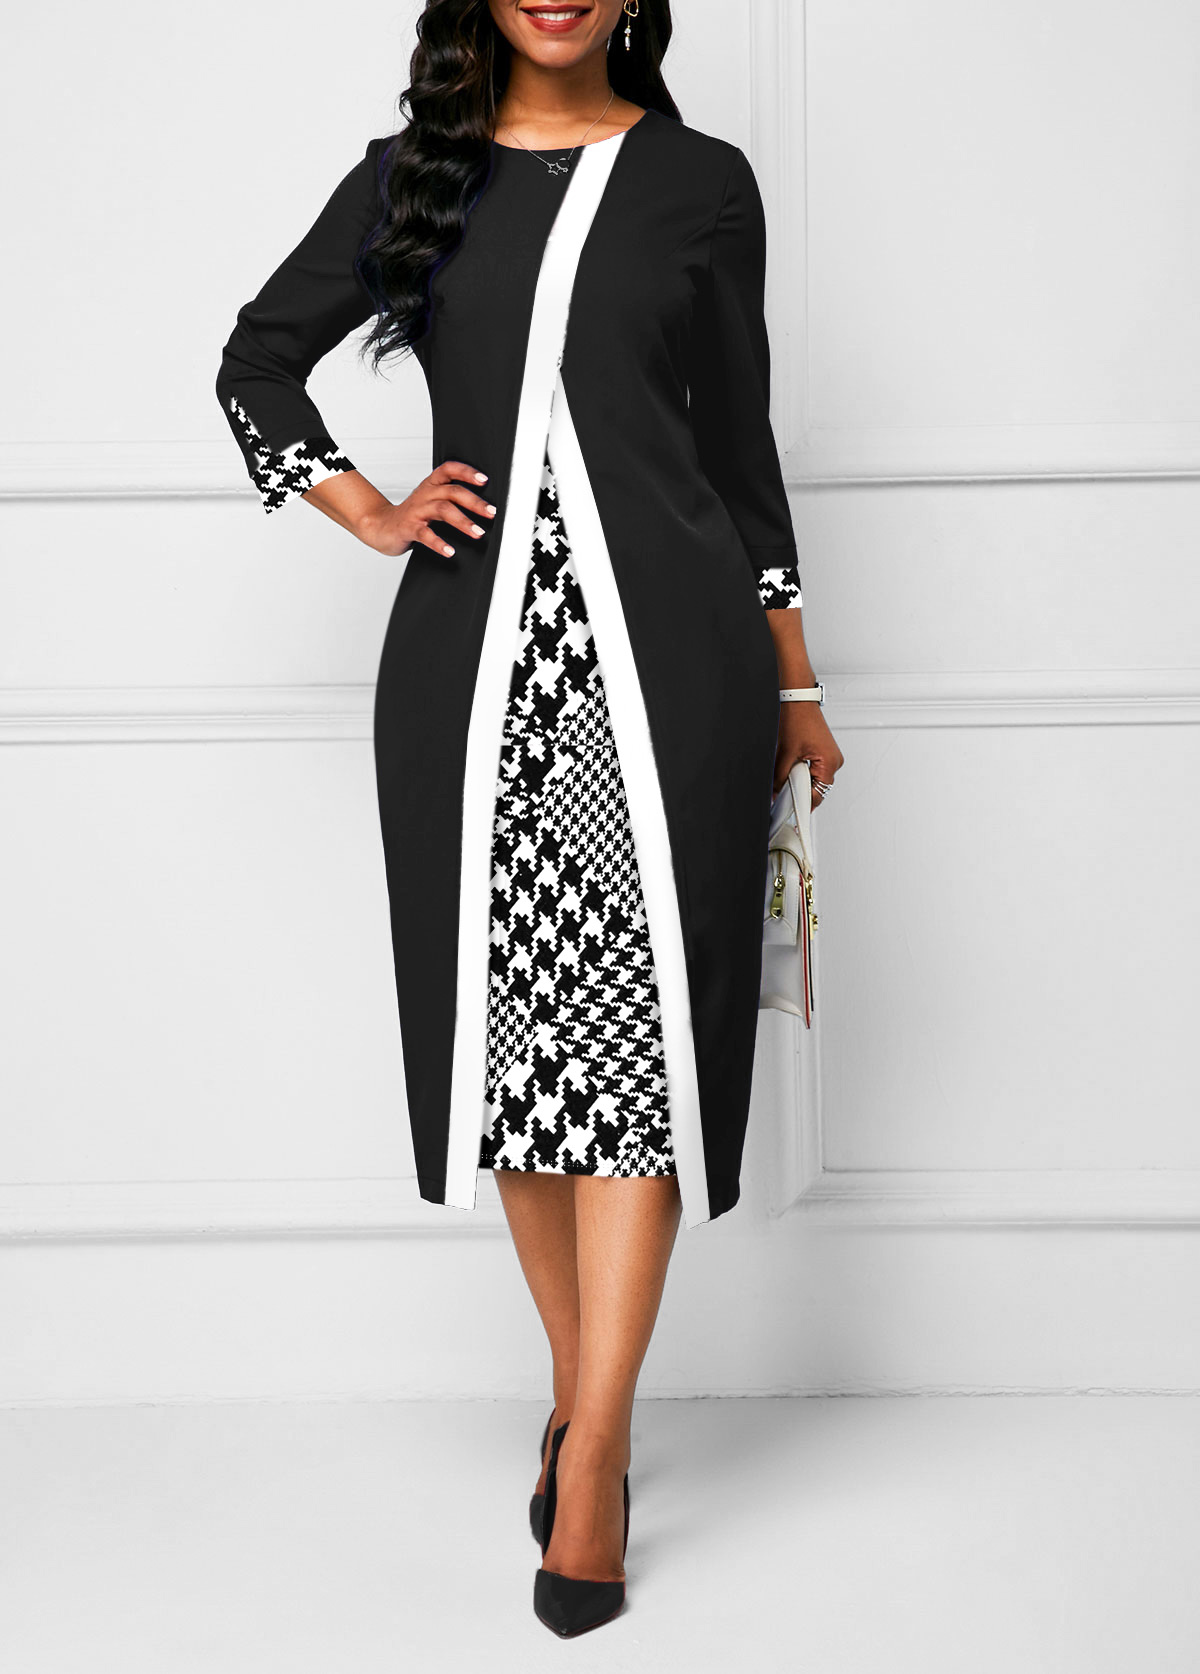 Black Houndstooth Print Faux Two Piece Dress